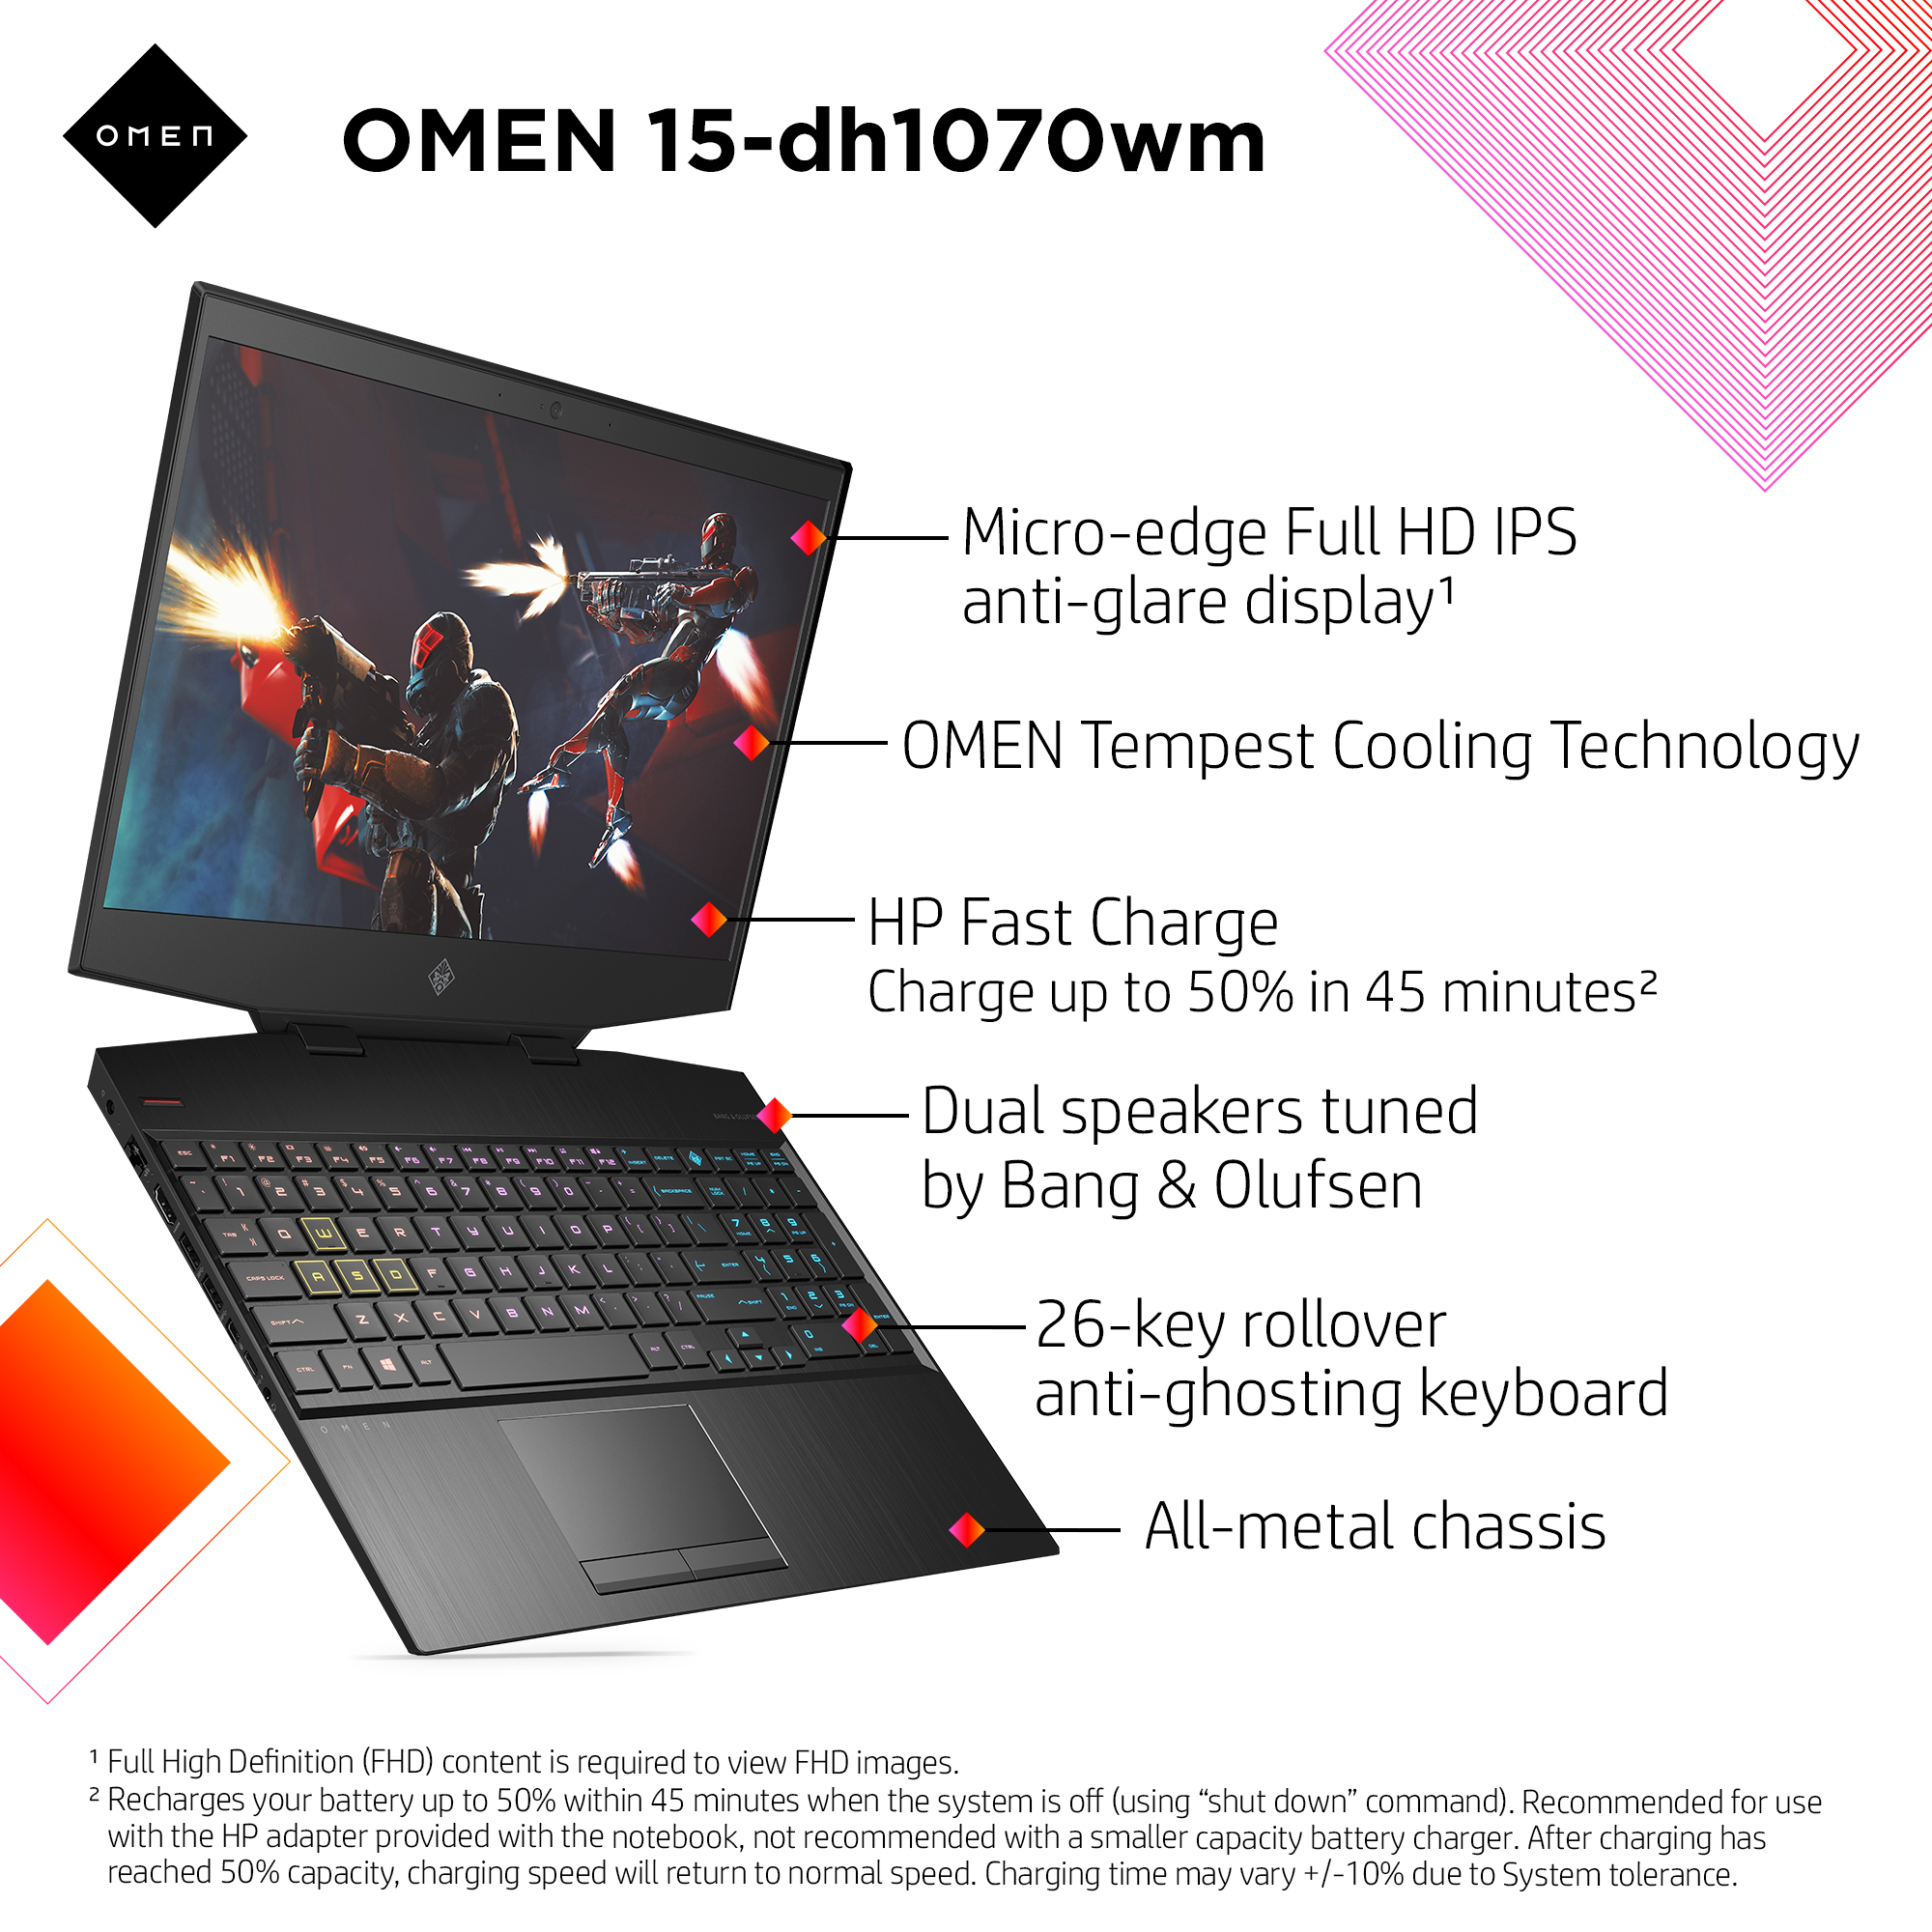 Omen by HP 15 FHD Gaming Laptop, Intel Core i7-10750H, NVIDIA GeForce GTX 1660 Ti 6GB, 8GB RAM, 1TB HDD + 256GB SSD, Mouse and Headset Bundle - image 4 of 16